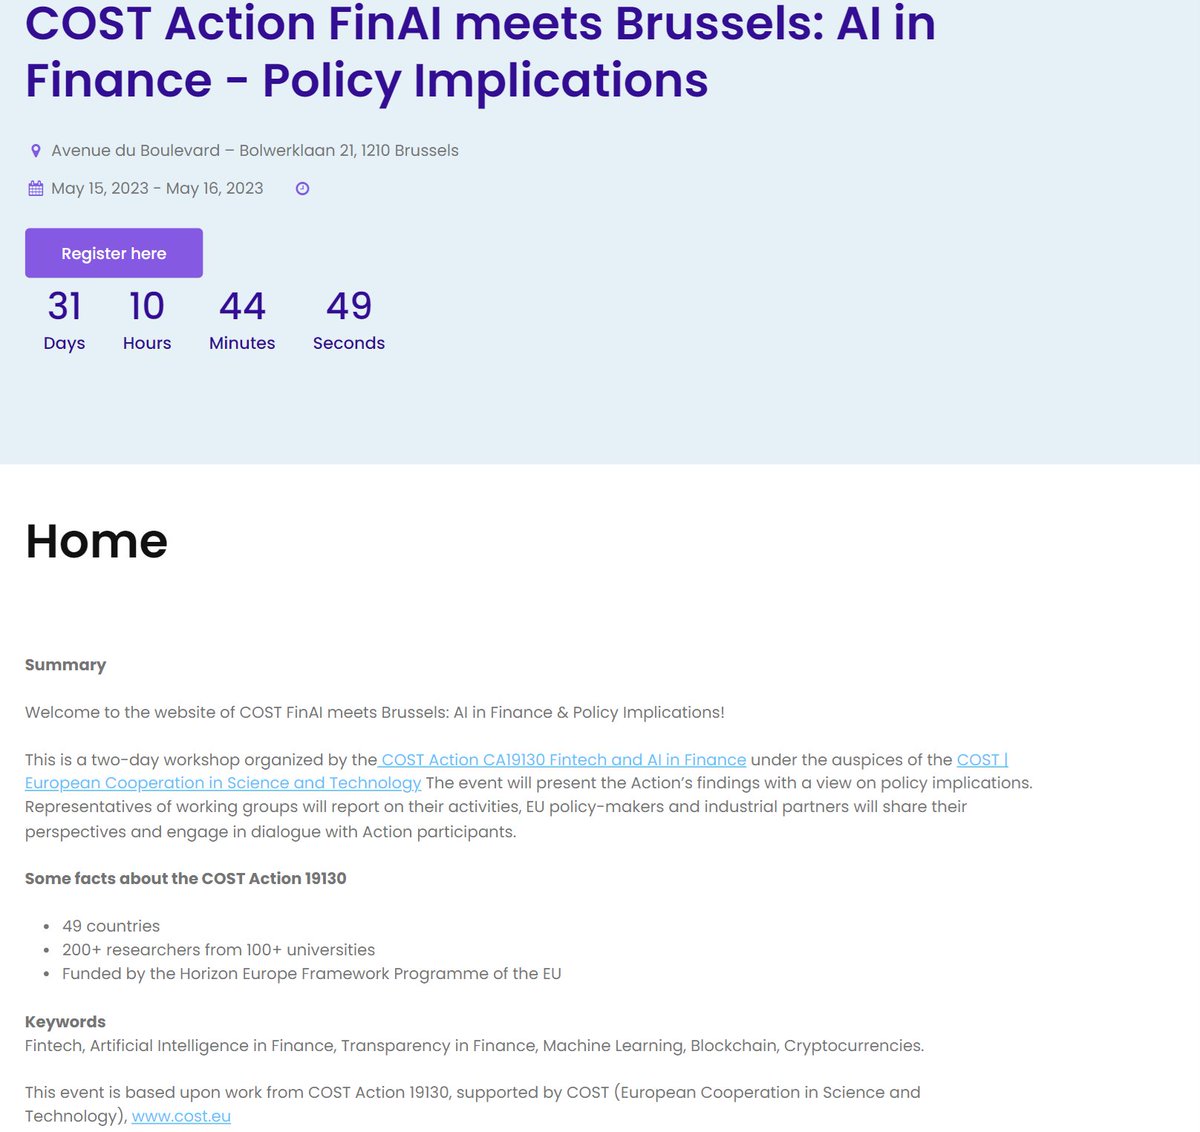 #SaveTheDate for two-day workshop “COST Action FinAI meets Brussels - AI in Finance-Policy Implications”, to be held in Brussels (Belgium) on May 15th-16th, 2023.

🔗Registration
conference.fin-ai.eu/meets_brussels/
#AI #COSTAction #FinTech #Finance